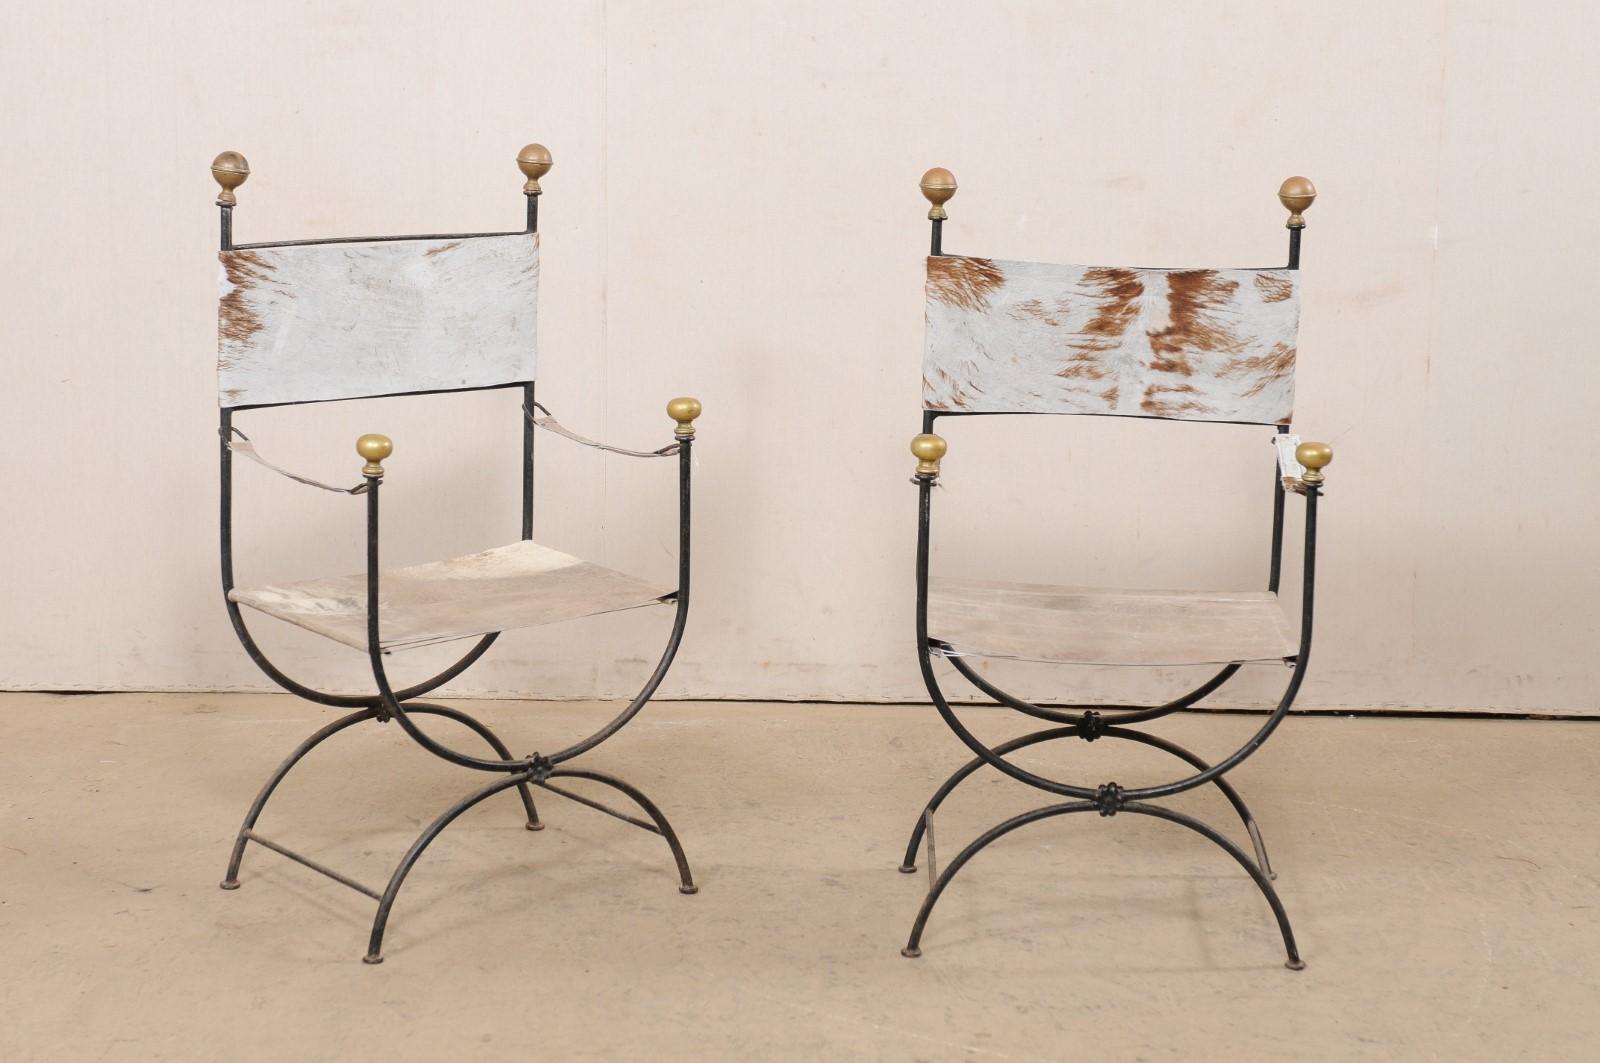 
An Italian pair of iron and hide curule chairs from the mid 20th century. This vintage pair of curule chairs from Italy are also commonly called savonarola, which are defined by their signature semi-circular frames where the upper frame adjoins to